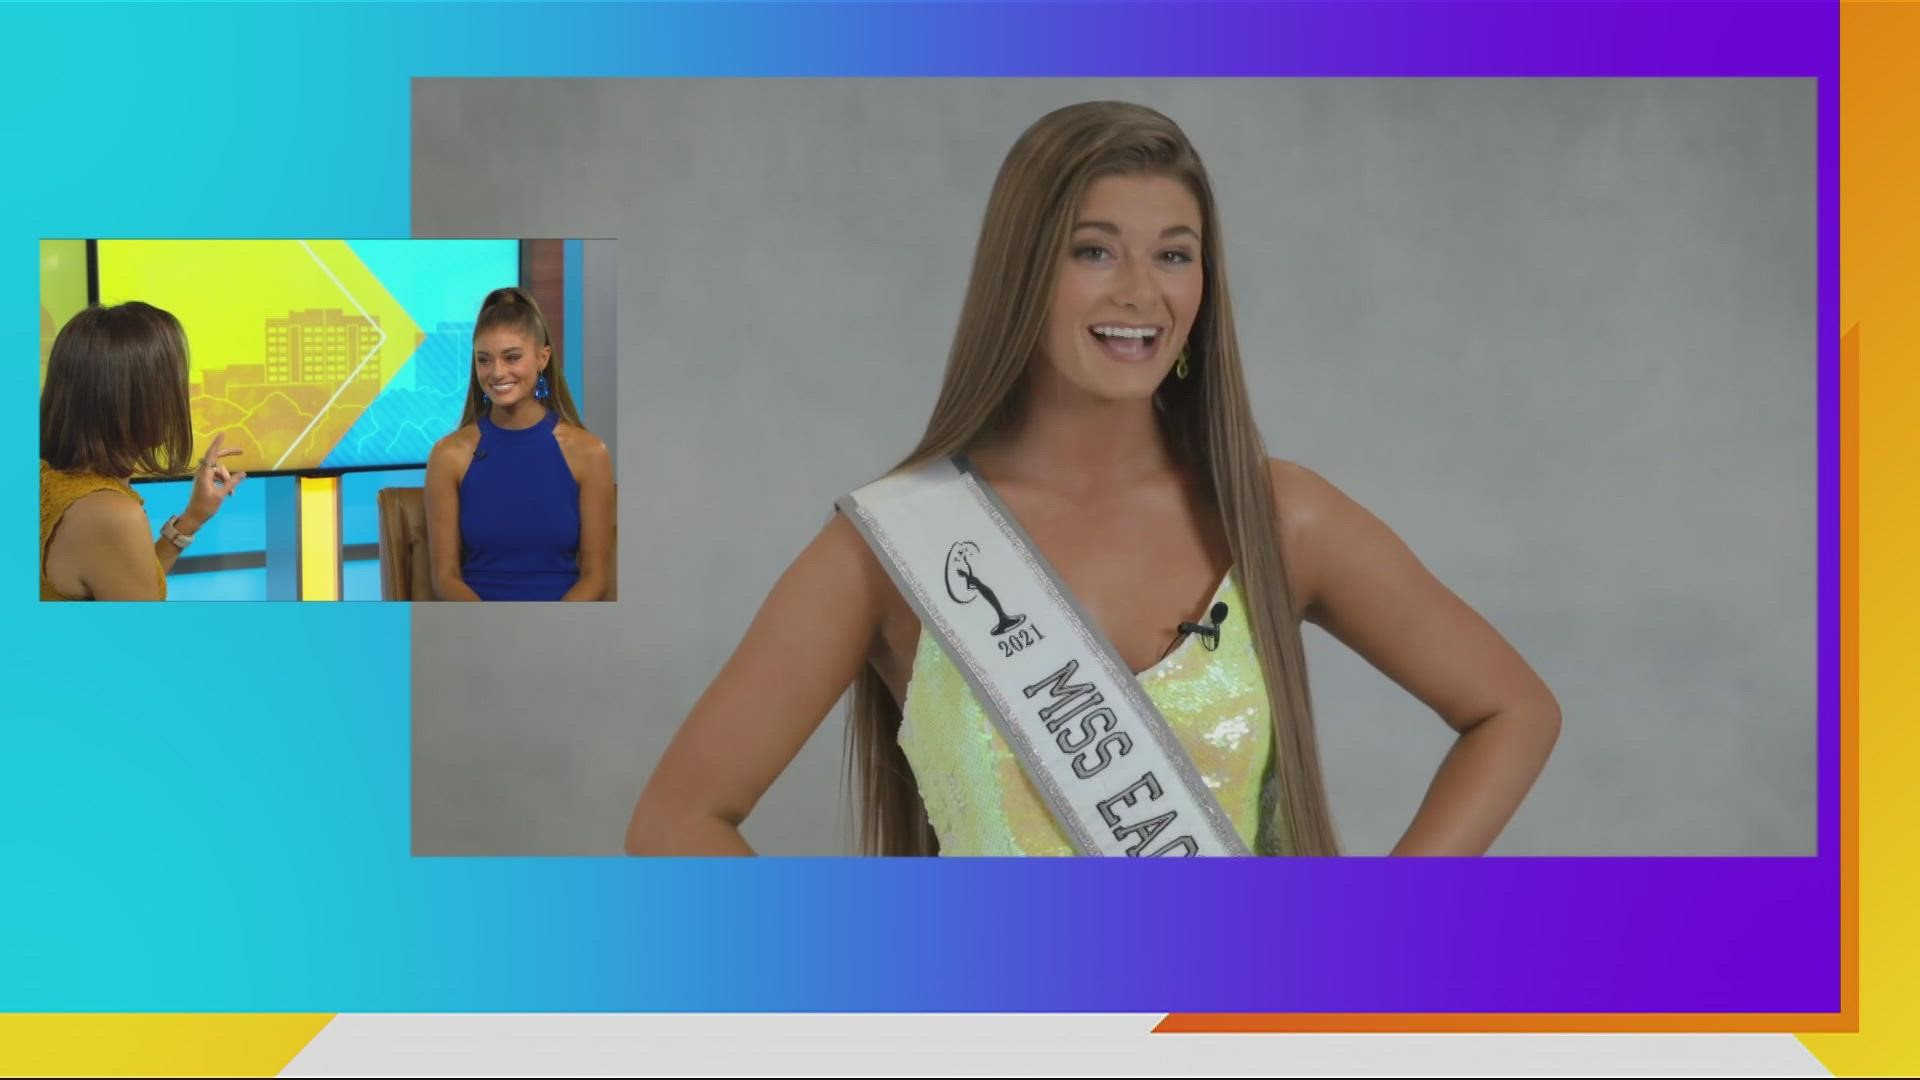 First runner up, and Miss Idaho USA Teen, Jenna Beckstrom shares what her experience was like during the competition this year.